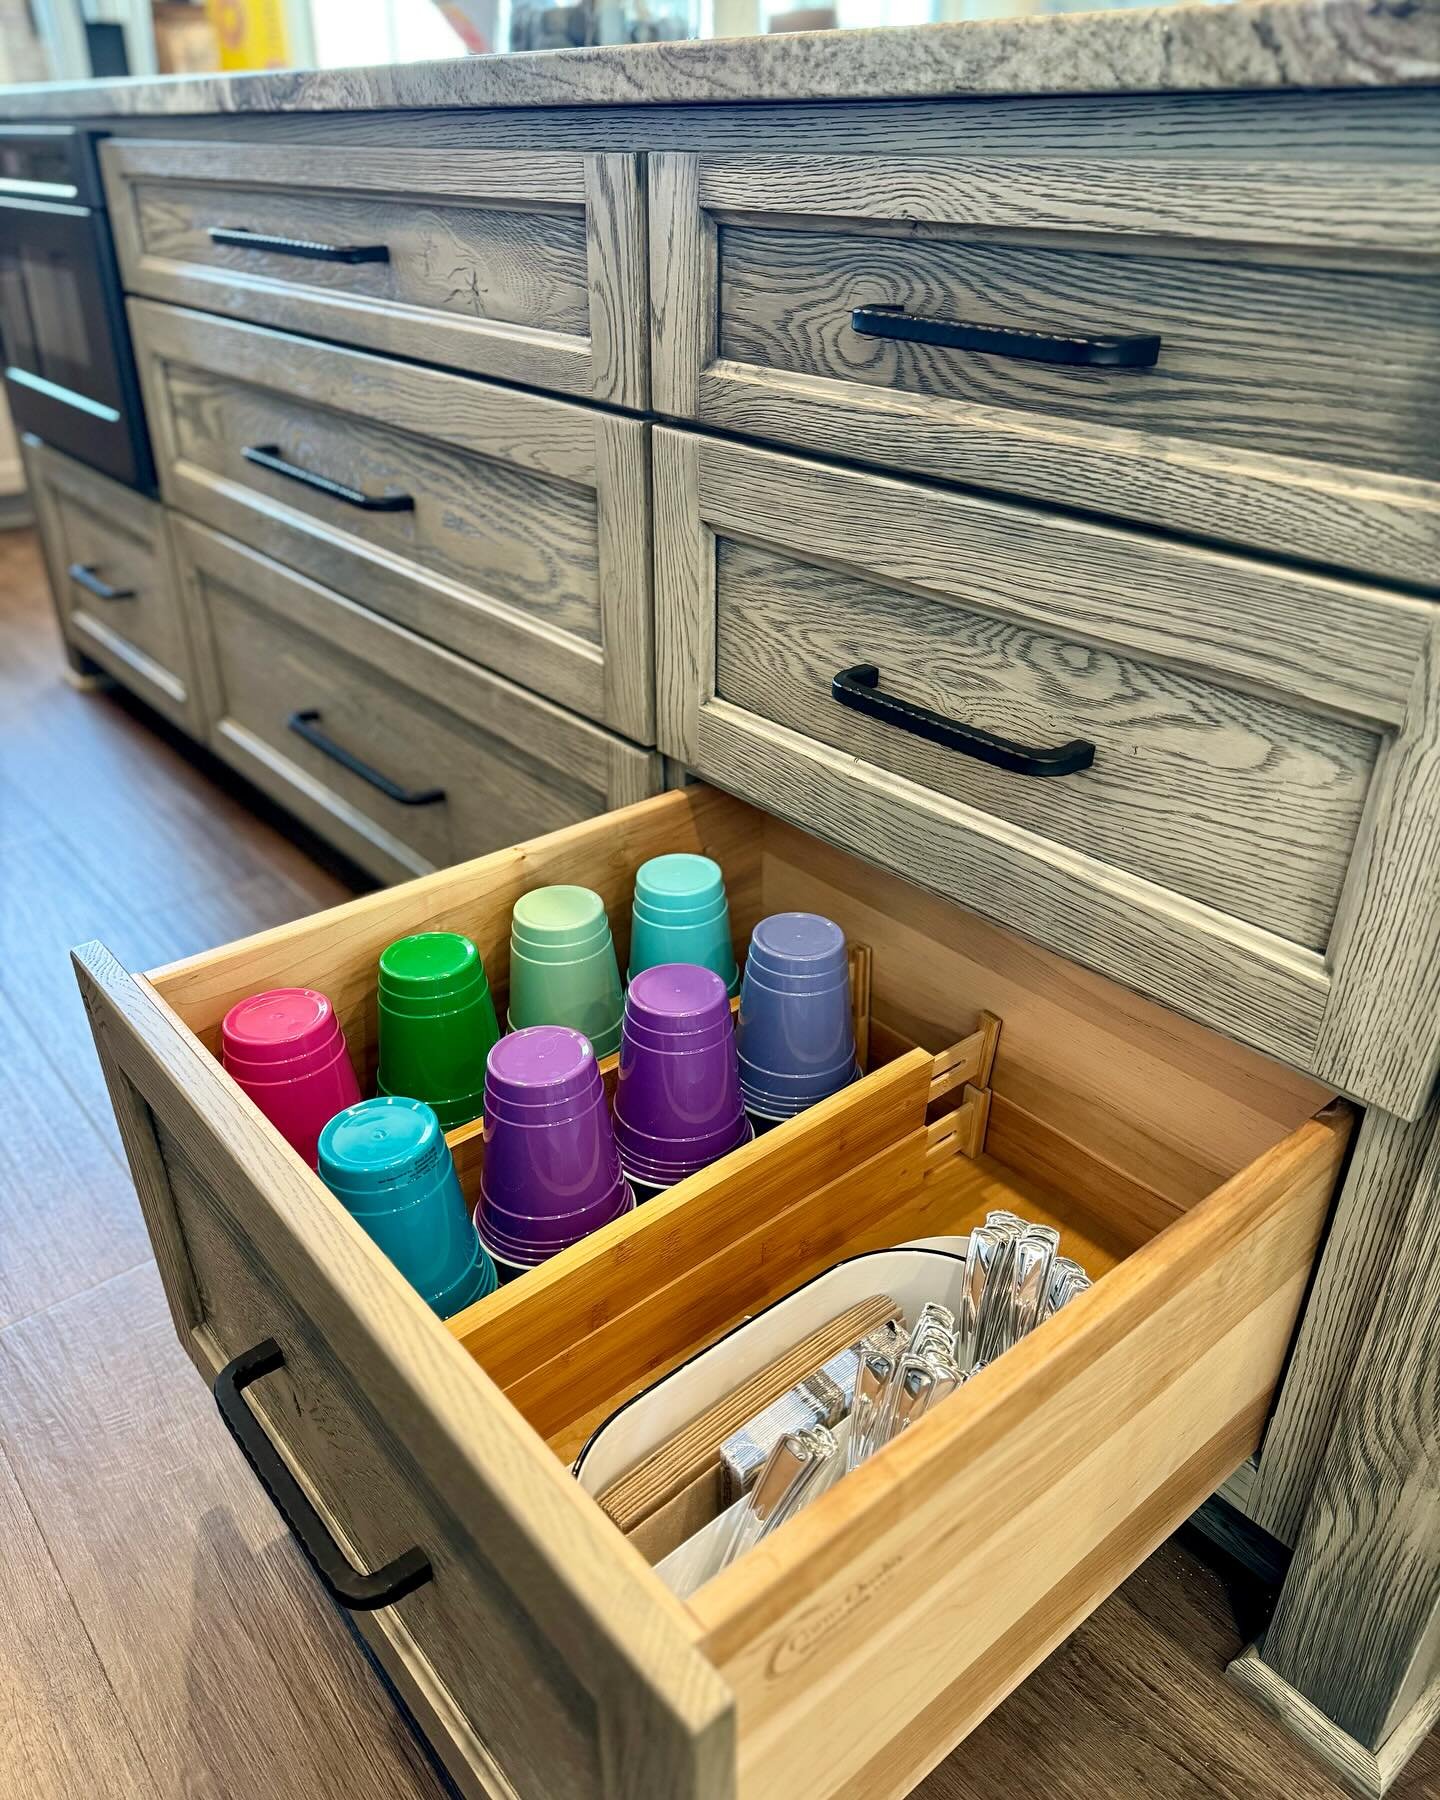 Time to get those outdoor dining stations in order! Keep all of your essentials like disposable cups and utensils in an easy-grab, help yourself spot, ready for those impromptu BBQs on warm summer nights! 

#kitchenorganization #organizedkitchen #org